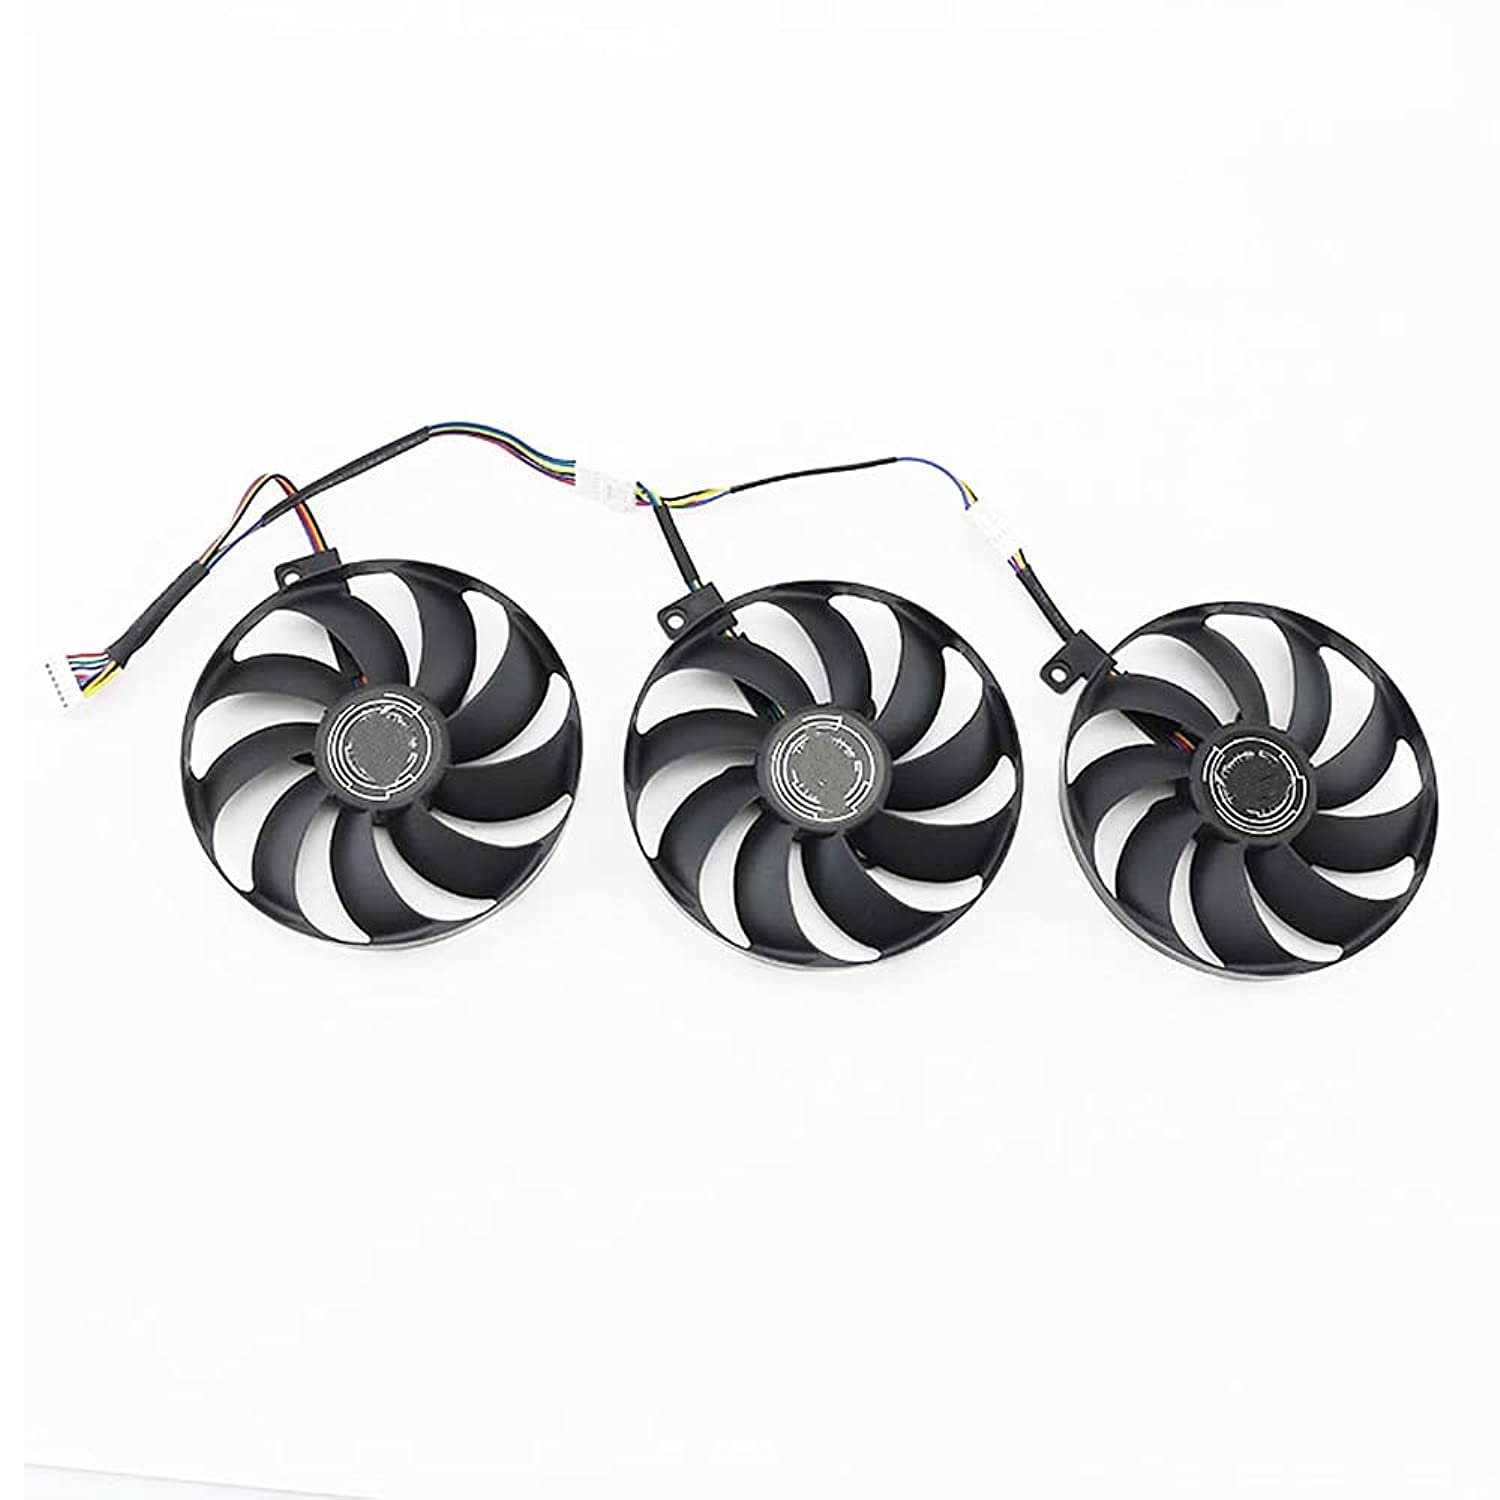 87Mm Graphics Card Cooling Fan Replacement For Asus Rog Strix Rtx 2080 2080 Super Rtx 2080Ti Rtx20